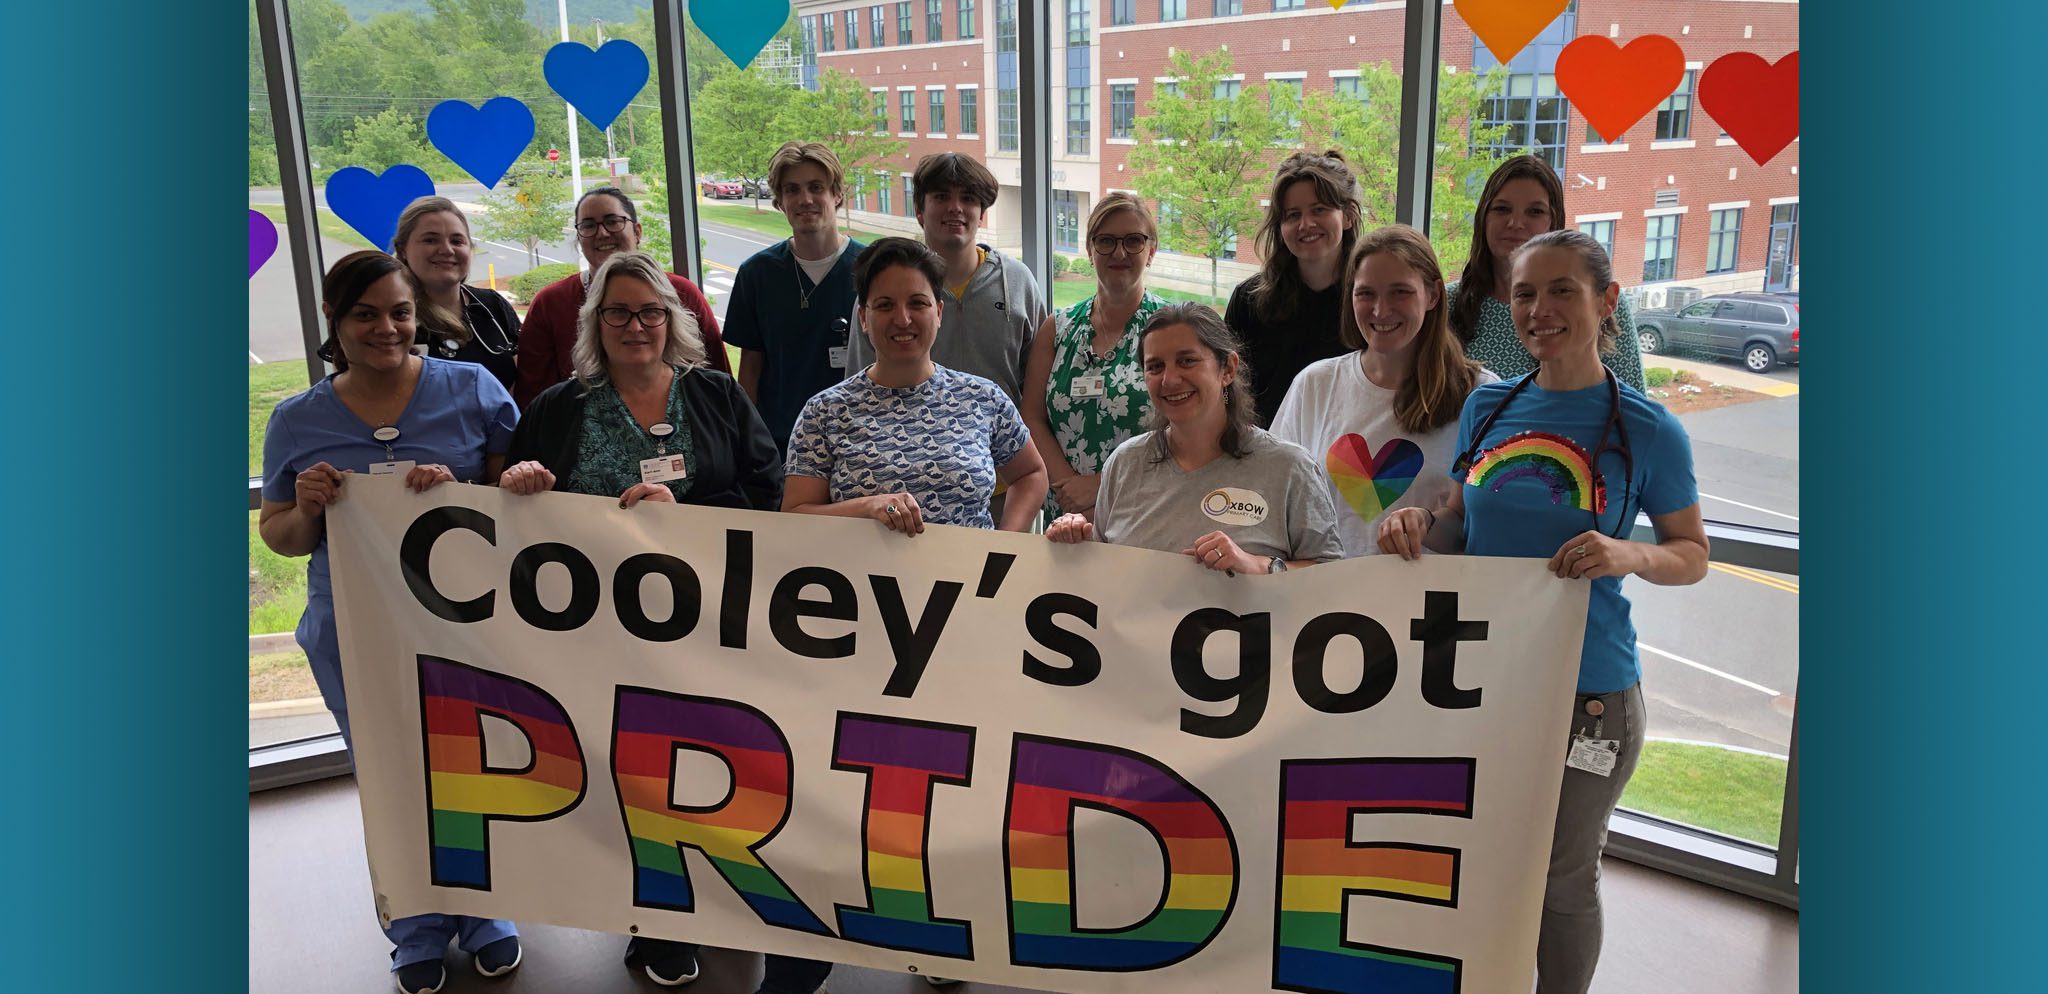 Oxbow staff members gathered together holding a "Cooley's Got Pride" sign